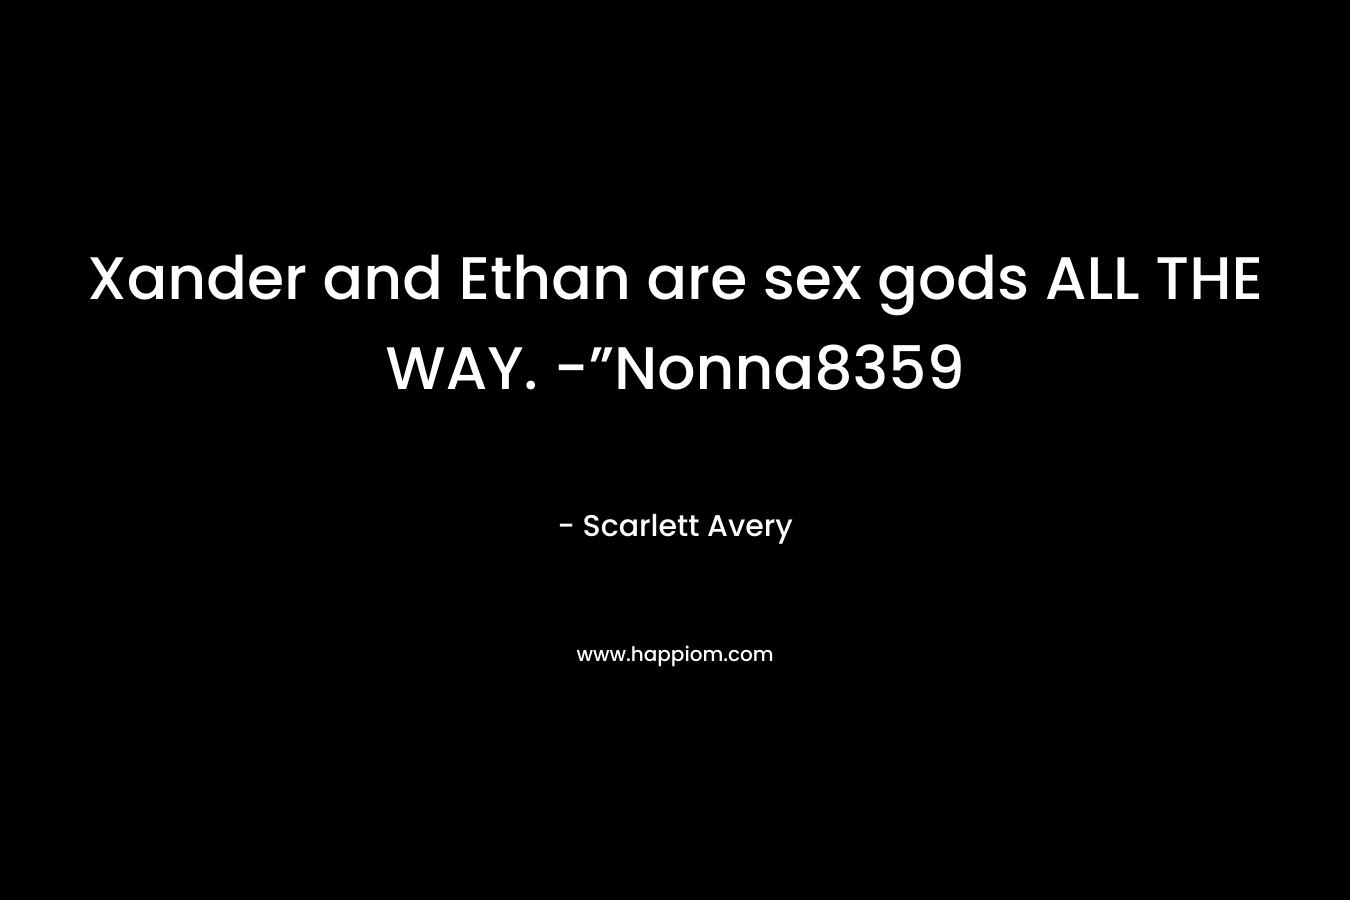 Xander and Ethan are sex gods ALL THE WAY. -”Nonna8359